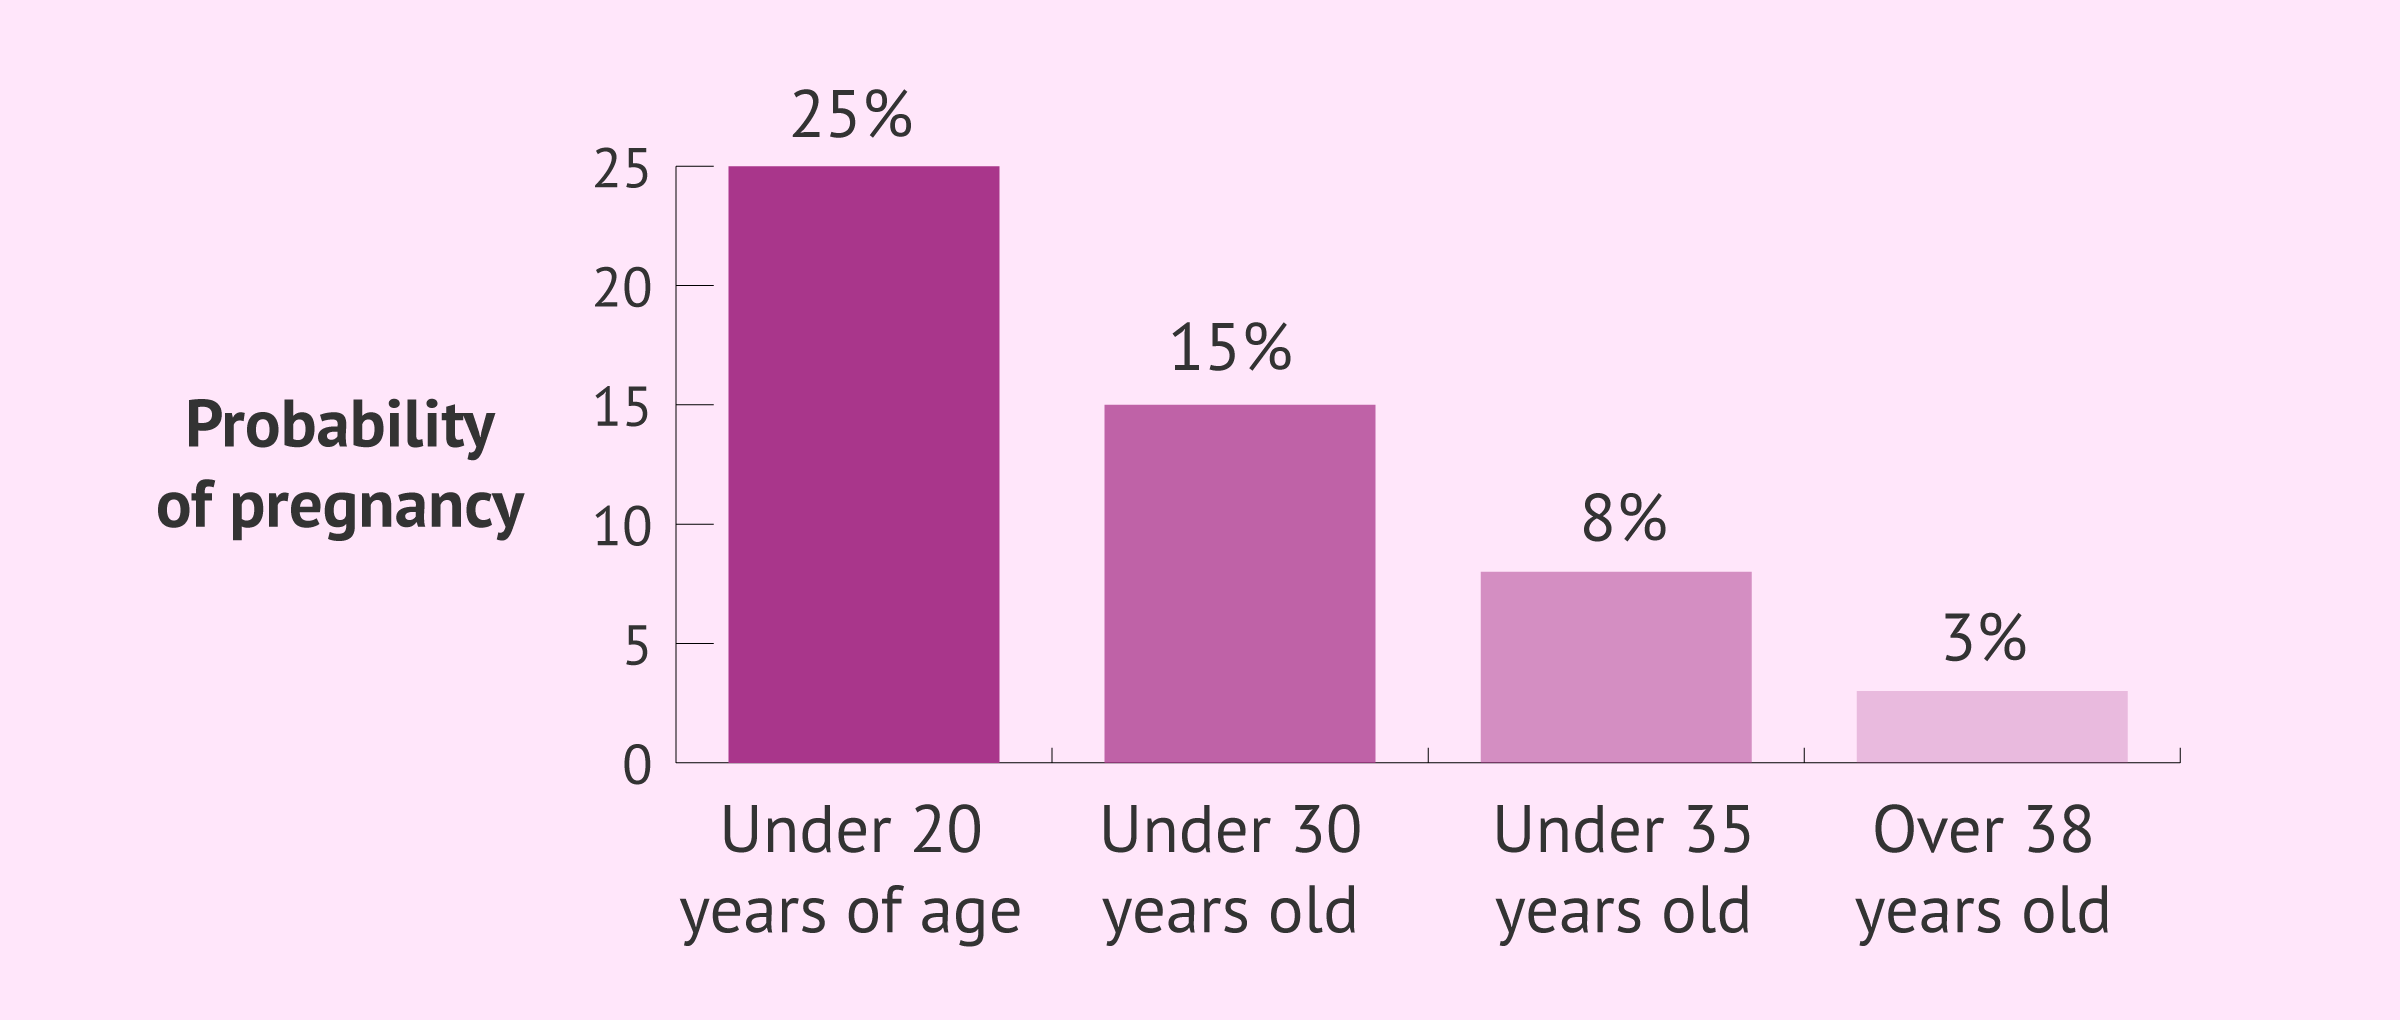 Probability of pregnancy according to biological age